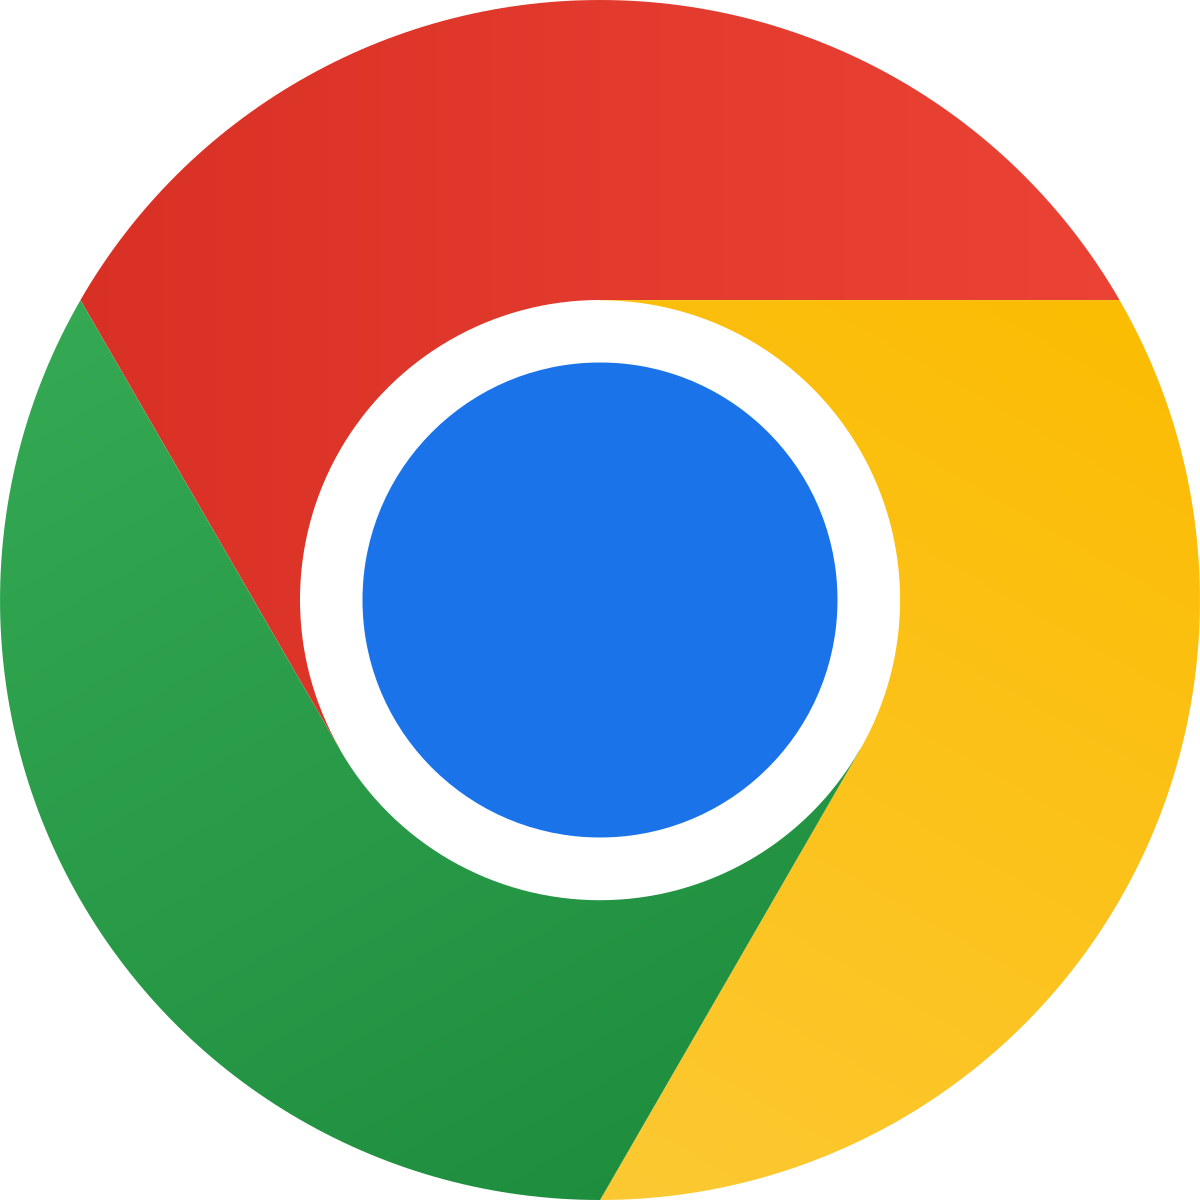 Google Chrome: A popular web browser that supports HTML5 and provides a seamless browsing experience.
Mozilla Firefox: Another widely used web browser that fully supports HTML5 and offers enhanced privacy features.